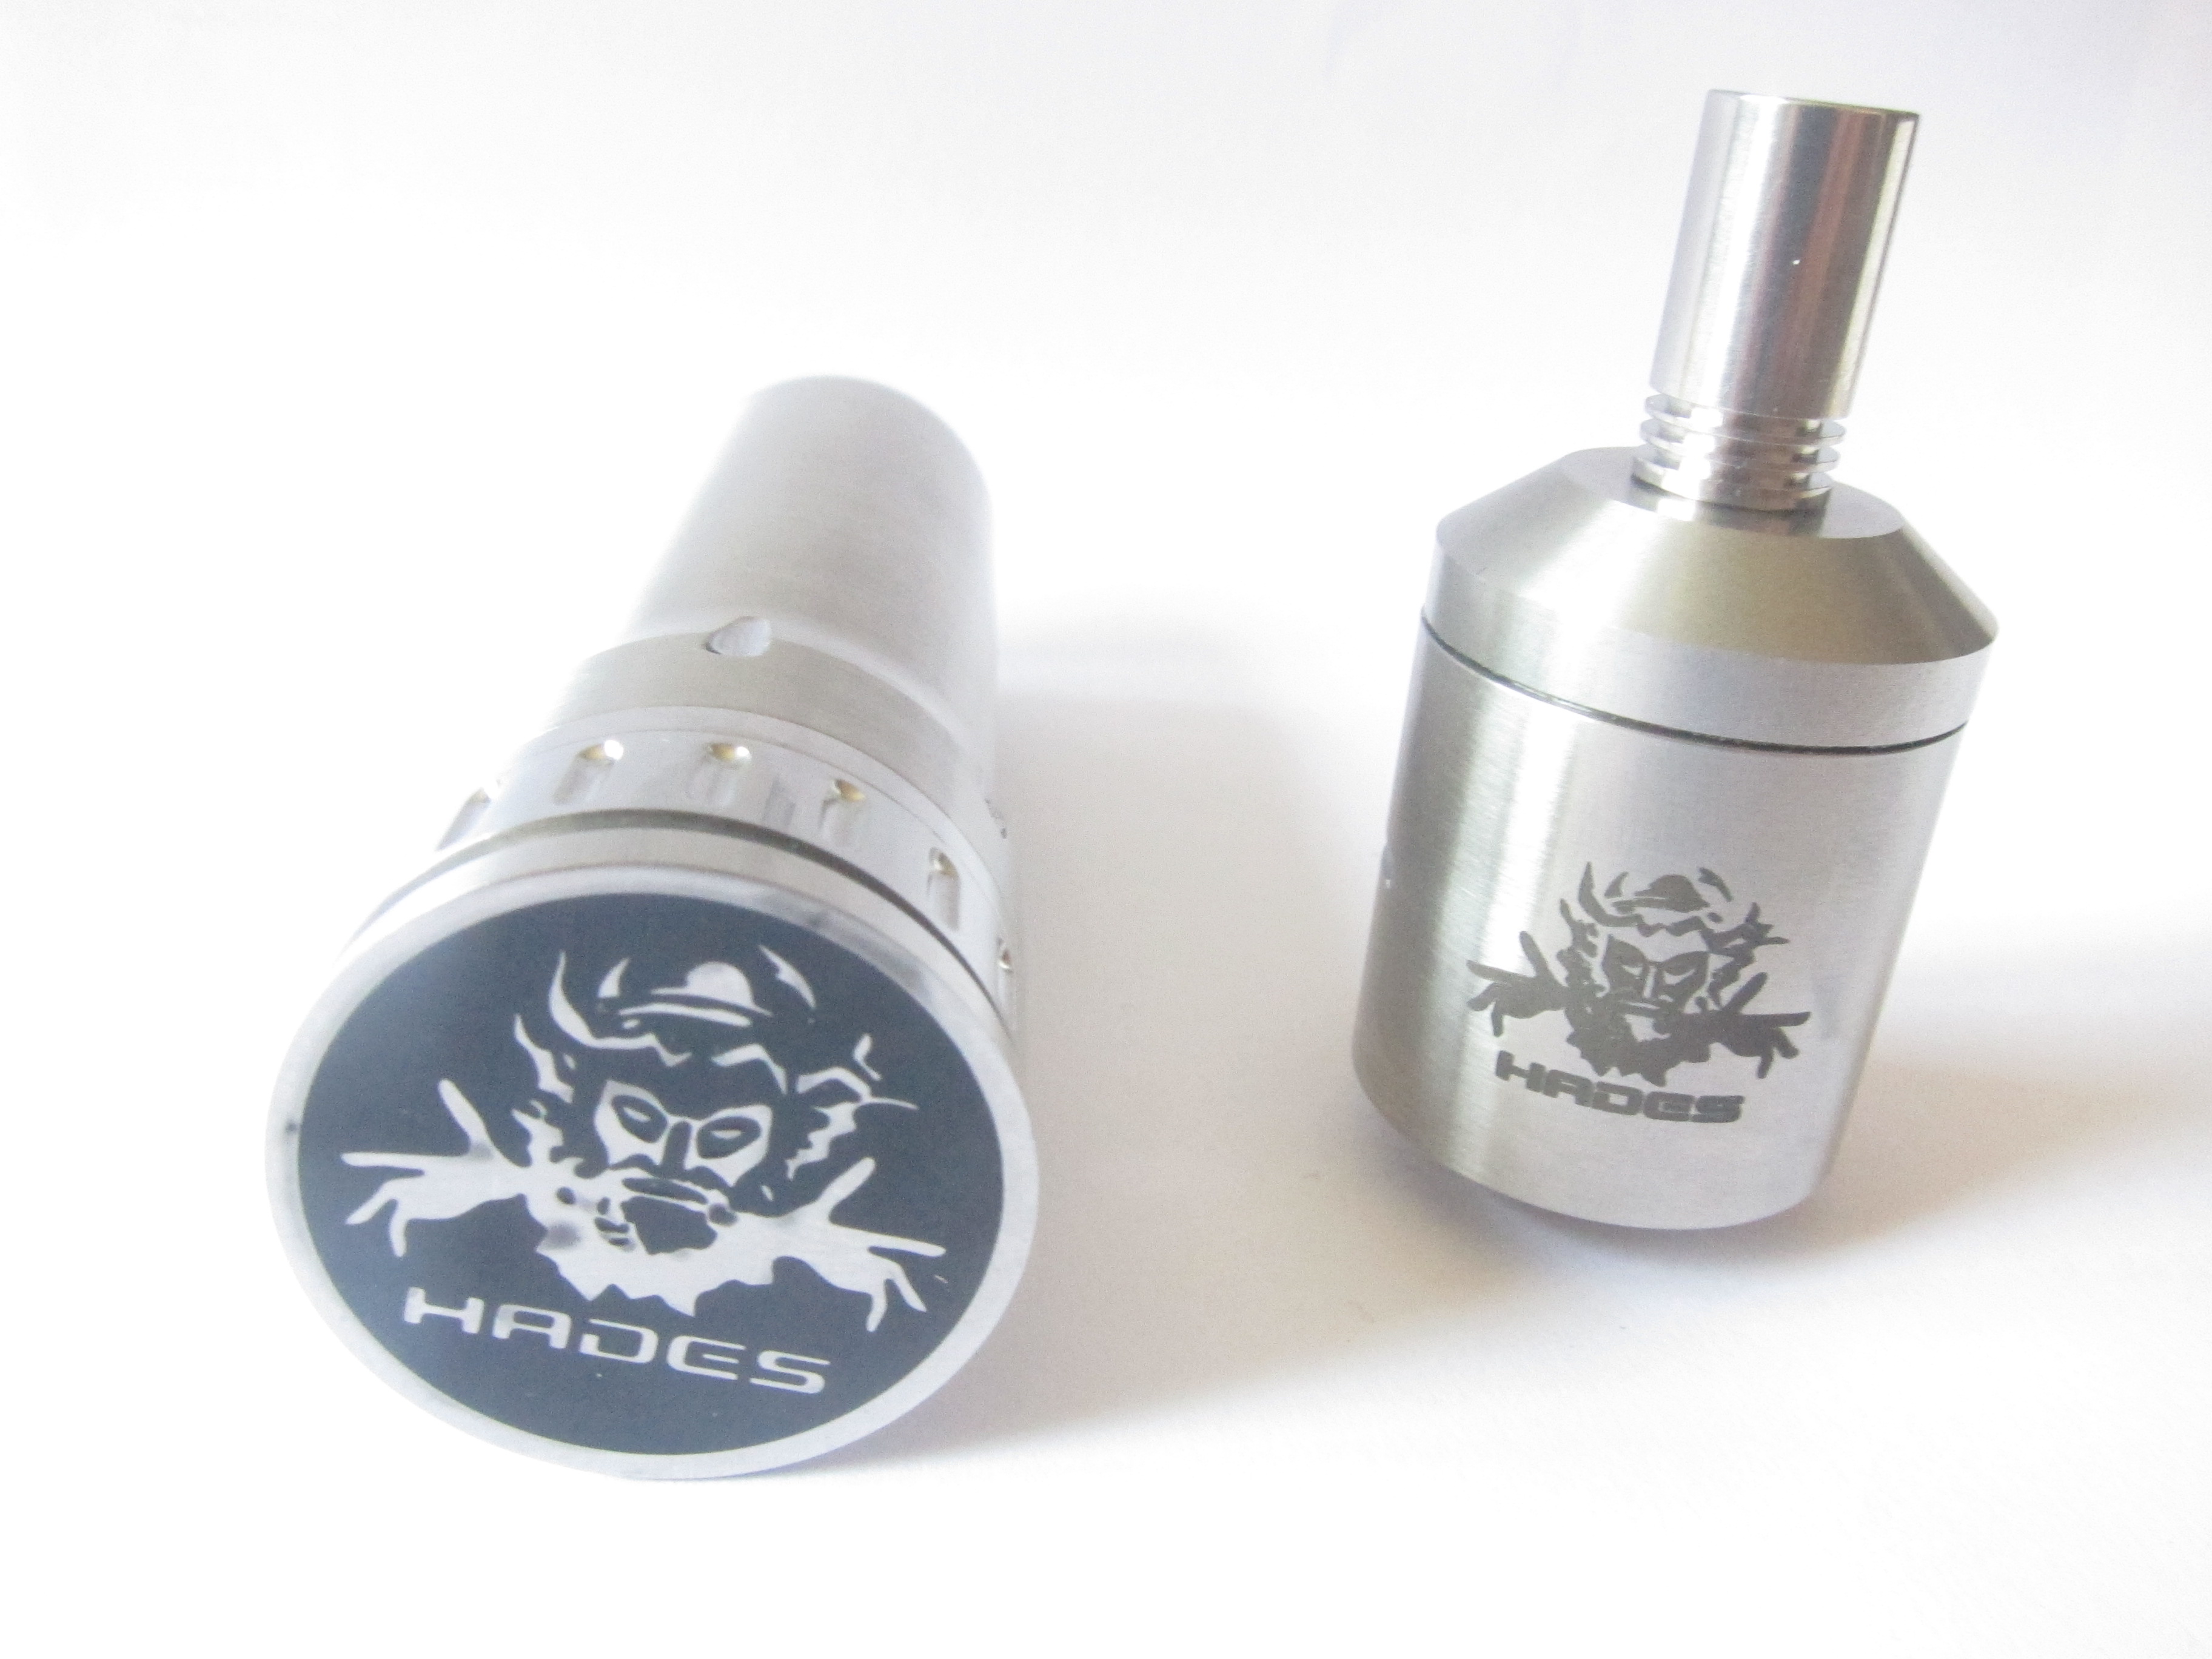 Mod Hades 26650 with Stainless steel Hades atomizer and 26650 Mnke battery